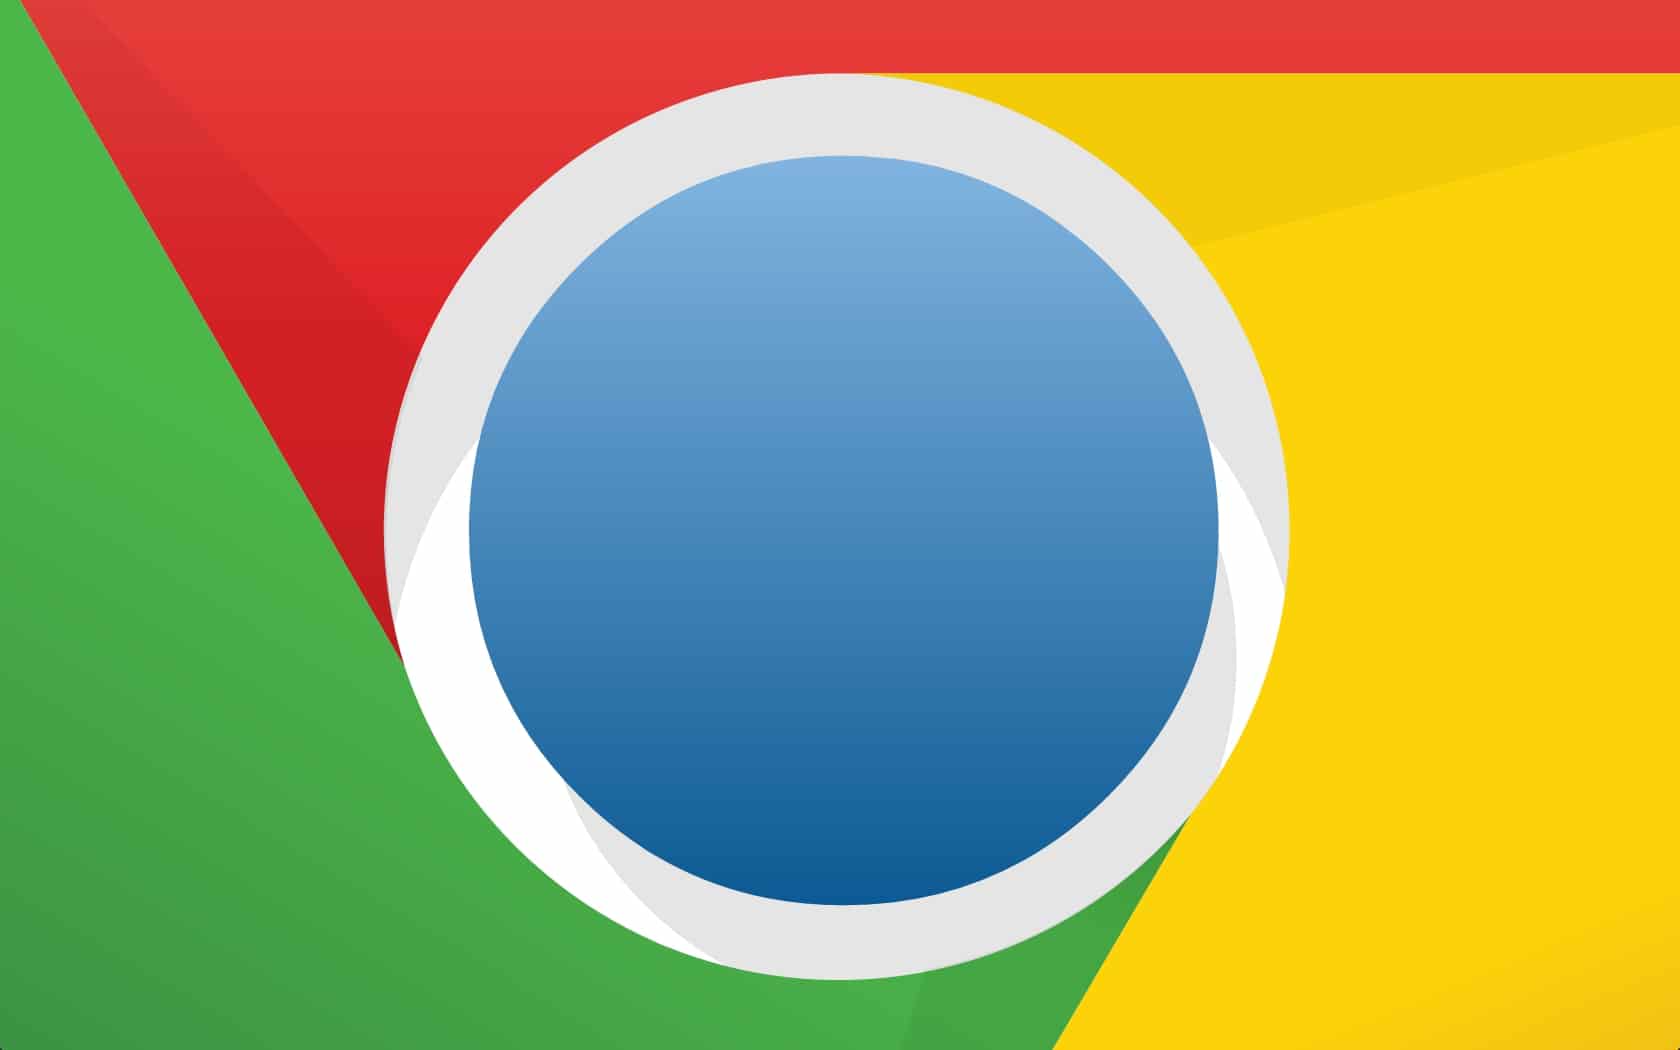 Chrome 80, the update may compromise some functions on outdated sites